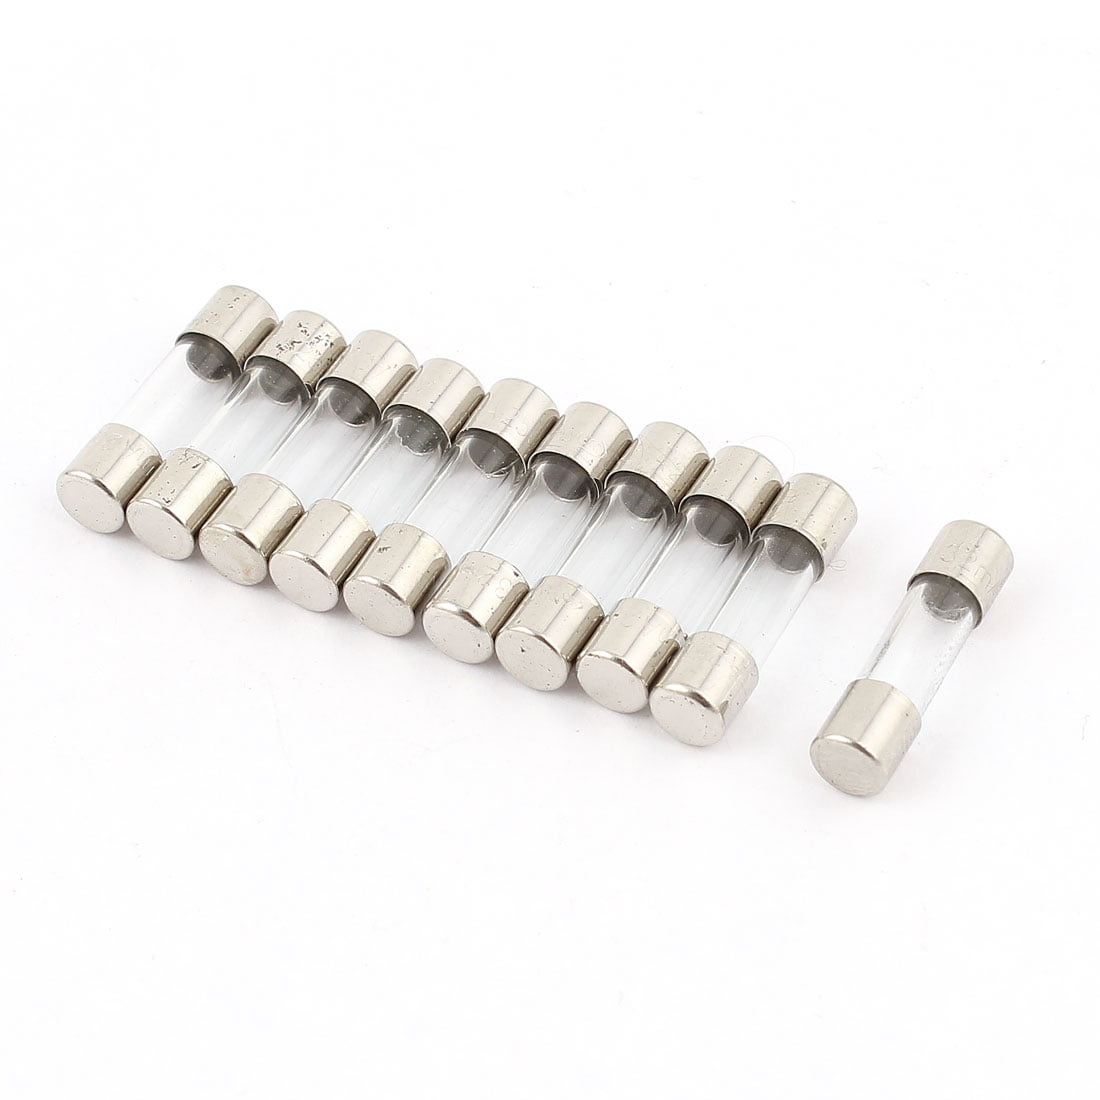 Set of 10 Fuses Glass 5x20 mm Timed Slow of choice of T 500ma to T 10a